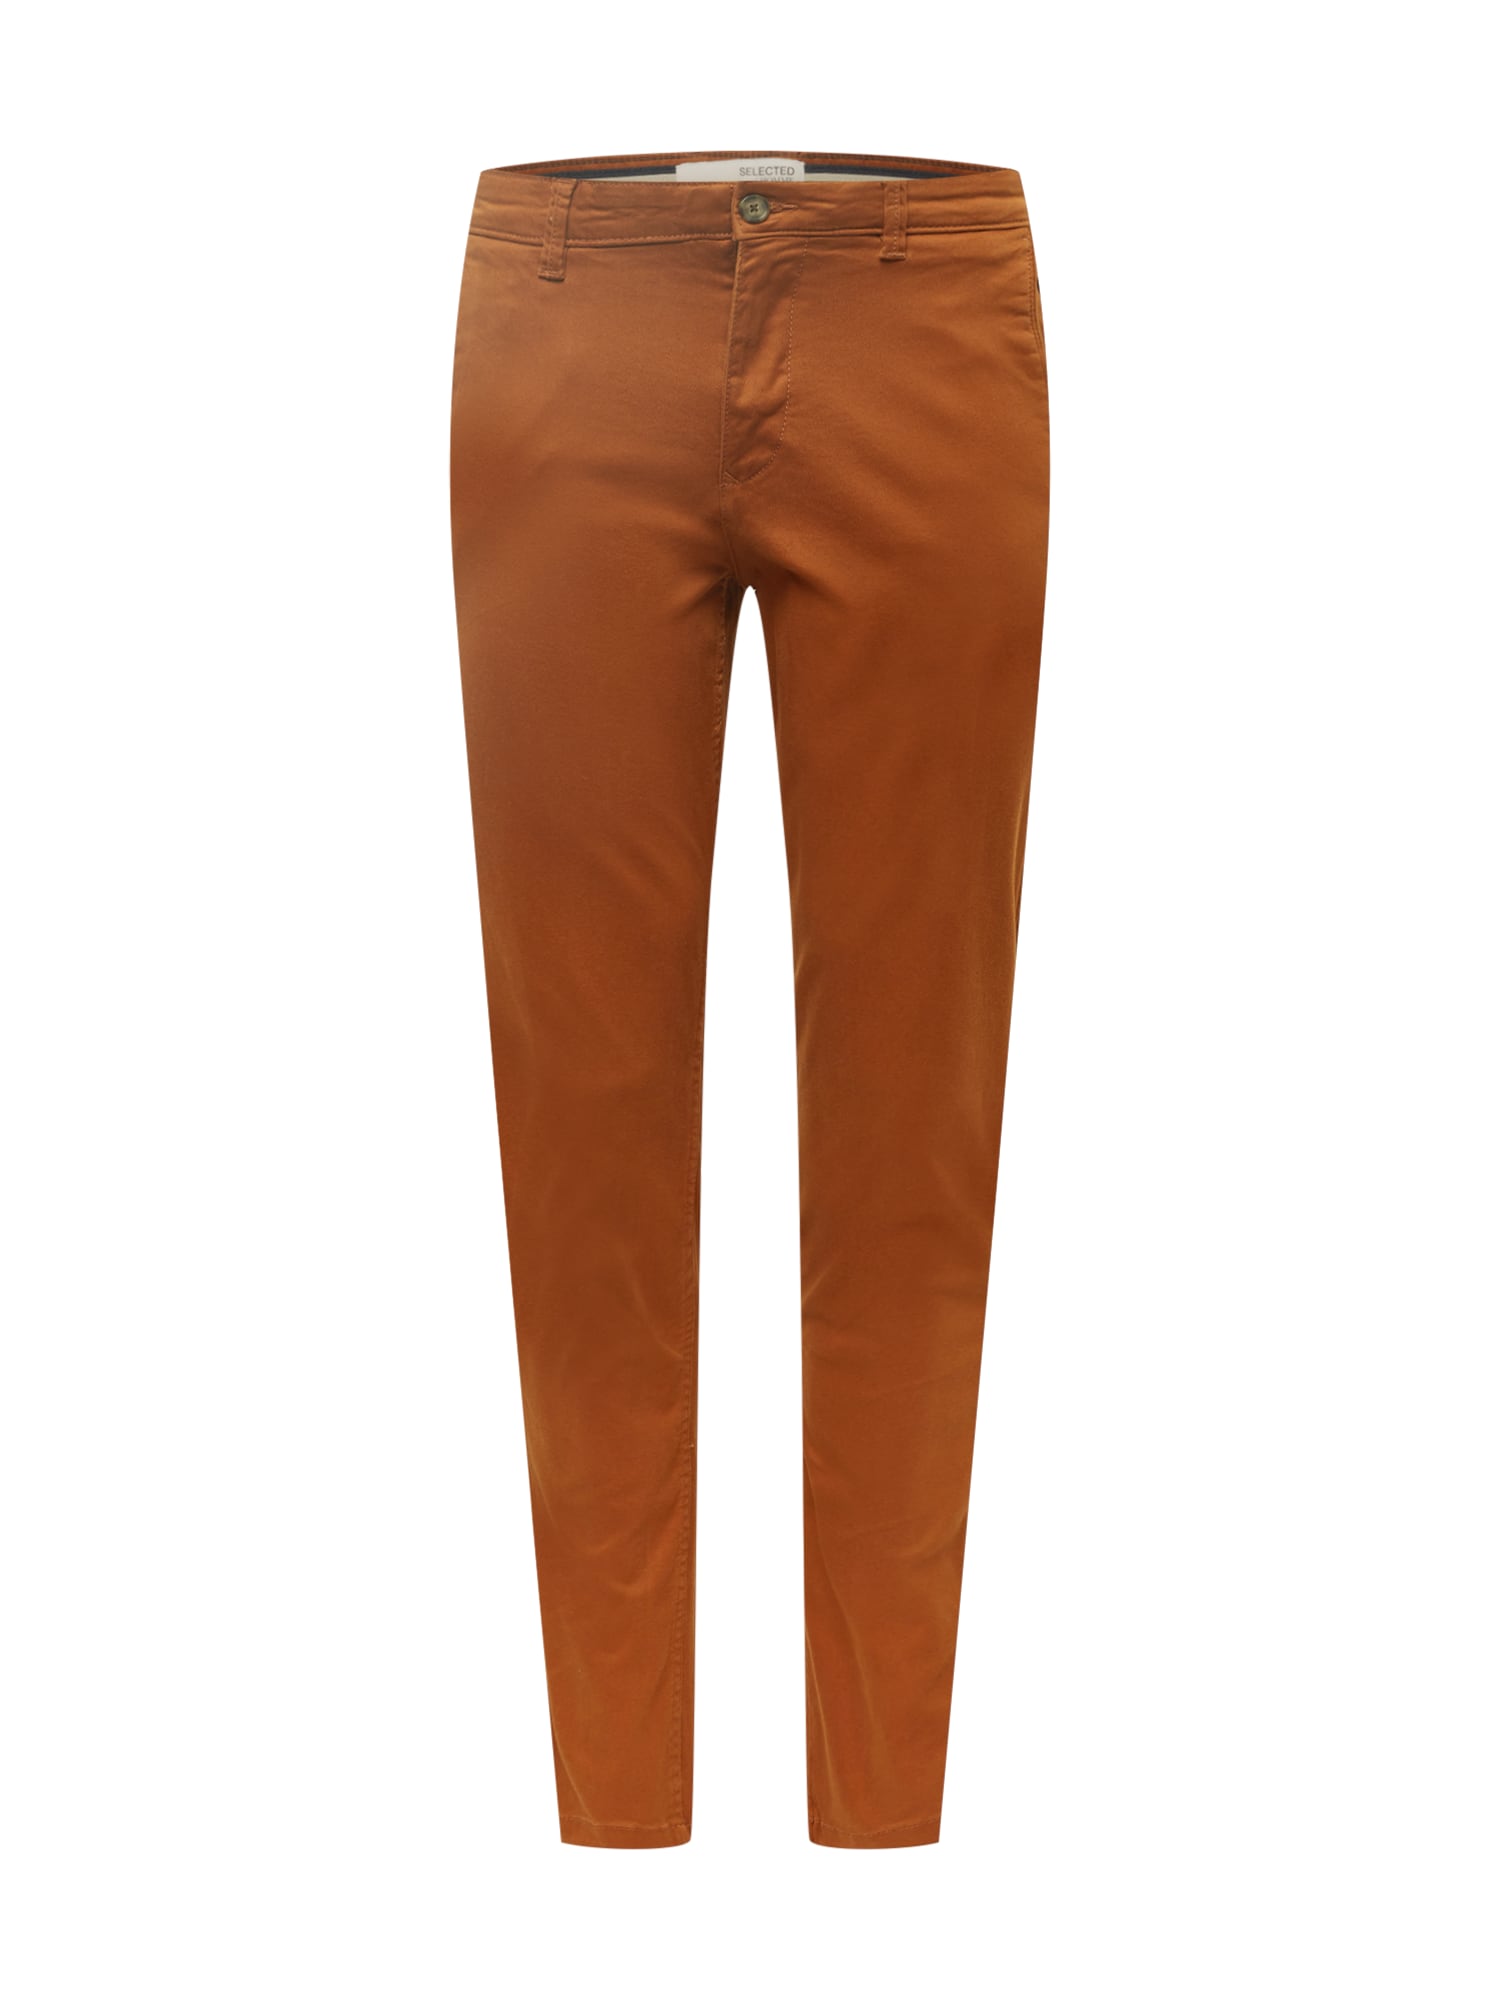 SELECTED HOMME Chino nadrág 'New Paris'  rozsdabarna